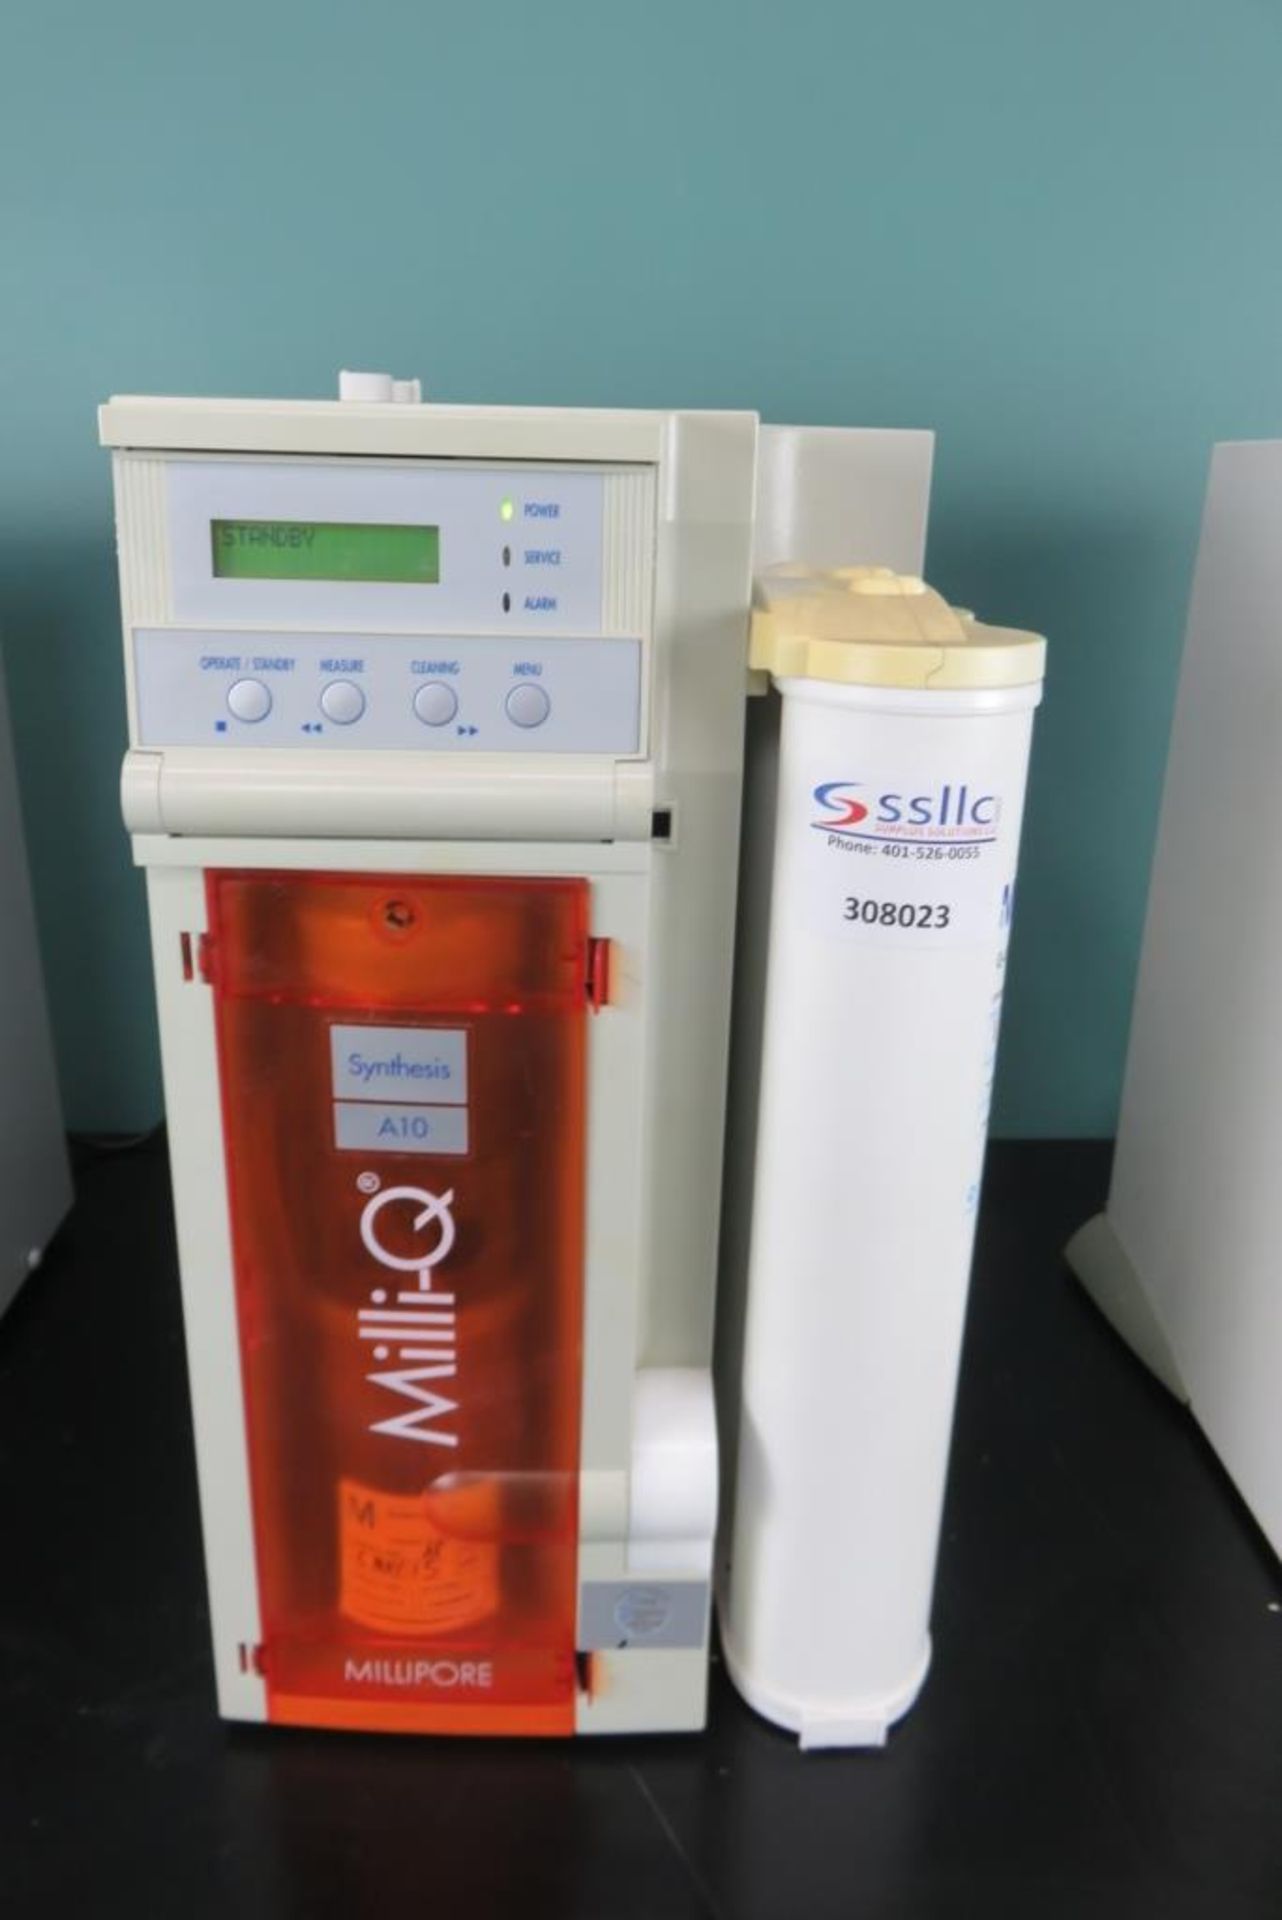 Millipore Milli-Q Synthesis A10 Water Purification System